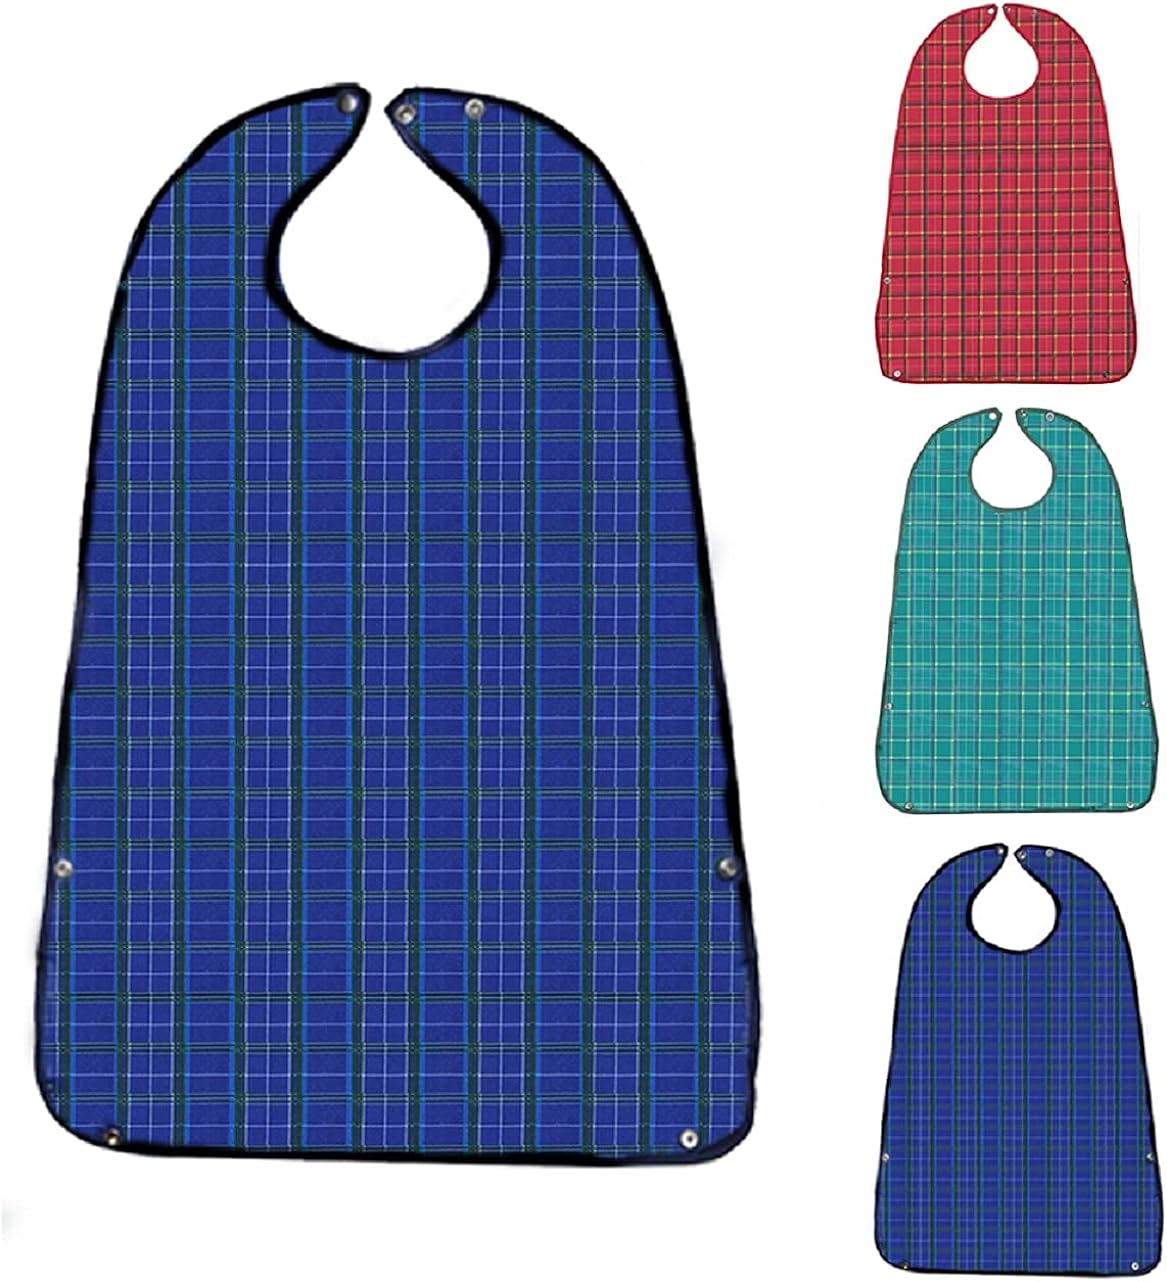 3 Pack Adult Bibs for Eating, Waterproof Clothing Protector with Crumb Catcher, Machine Washable Adult Bibs for menwomen